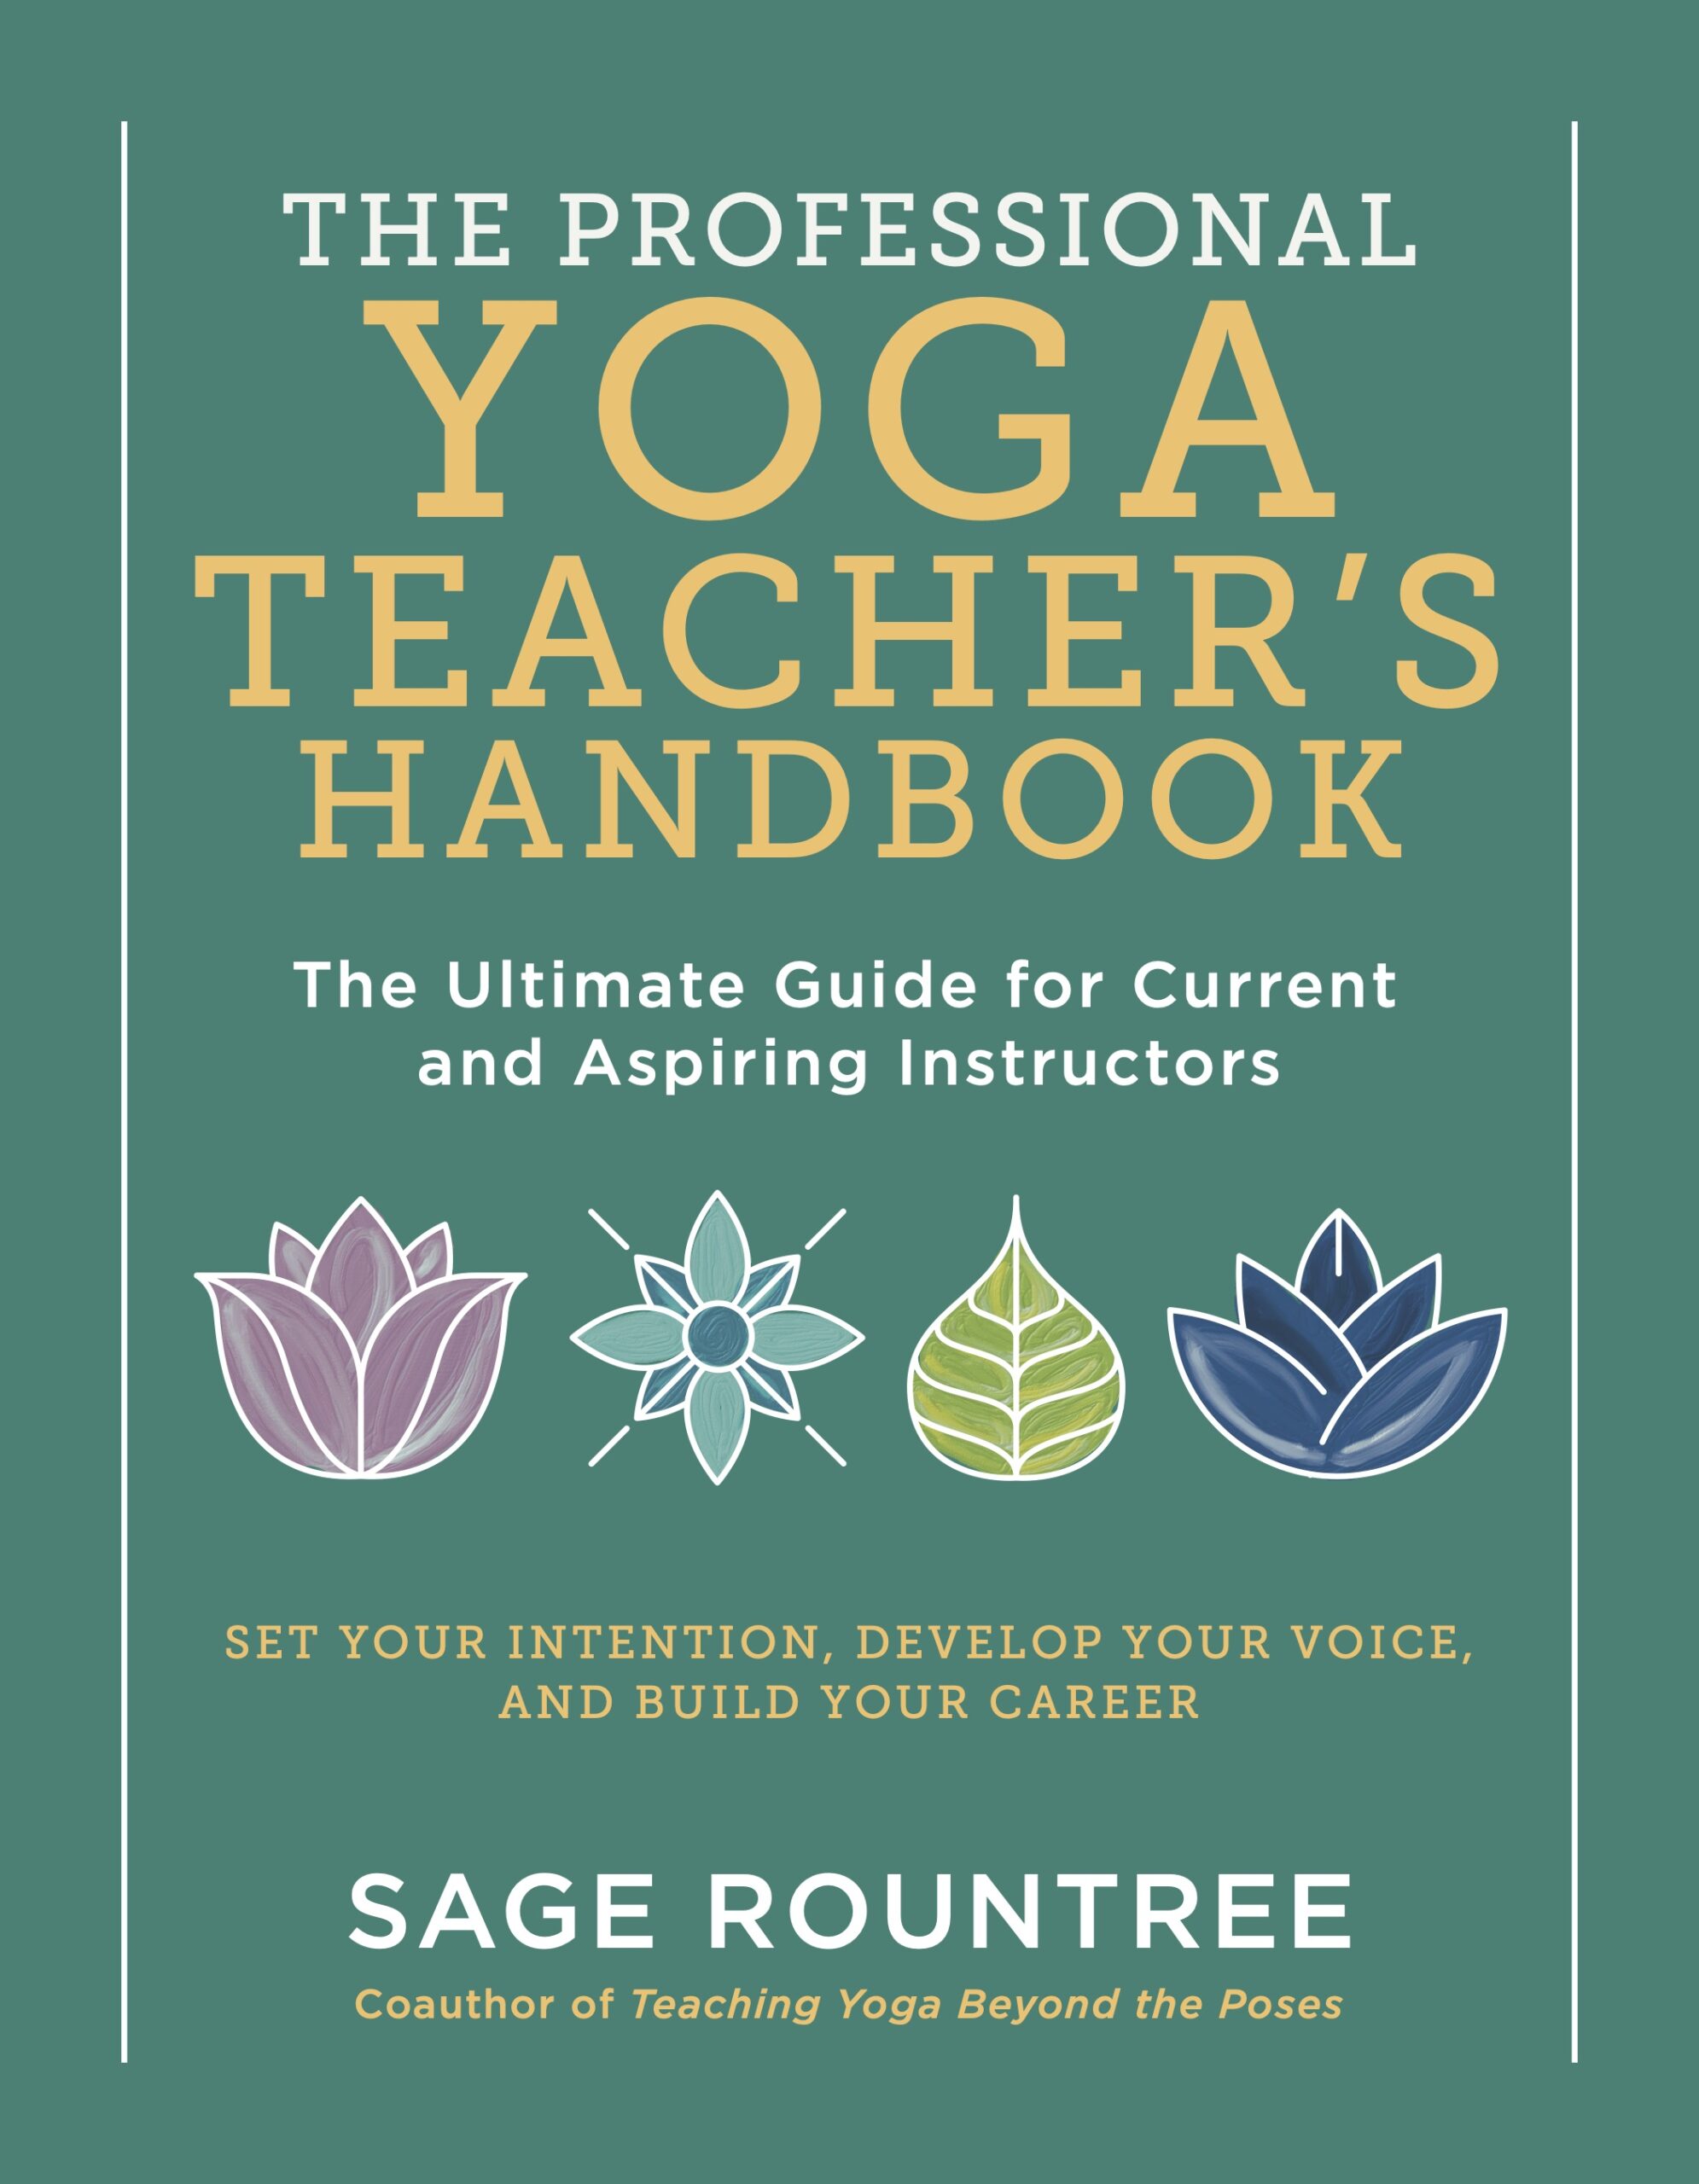 Now Available for Preorder: The Professional Yoga Teacher’s Handbook